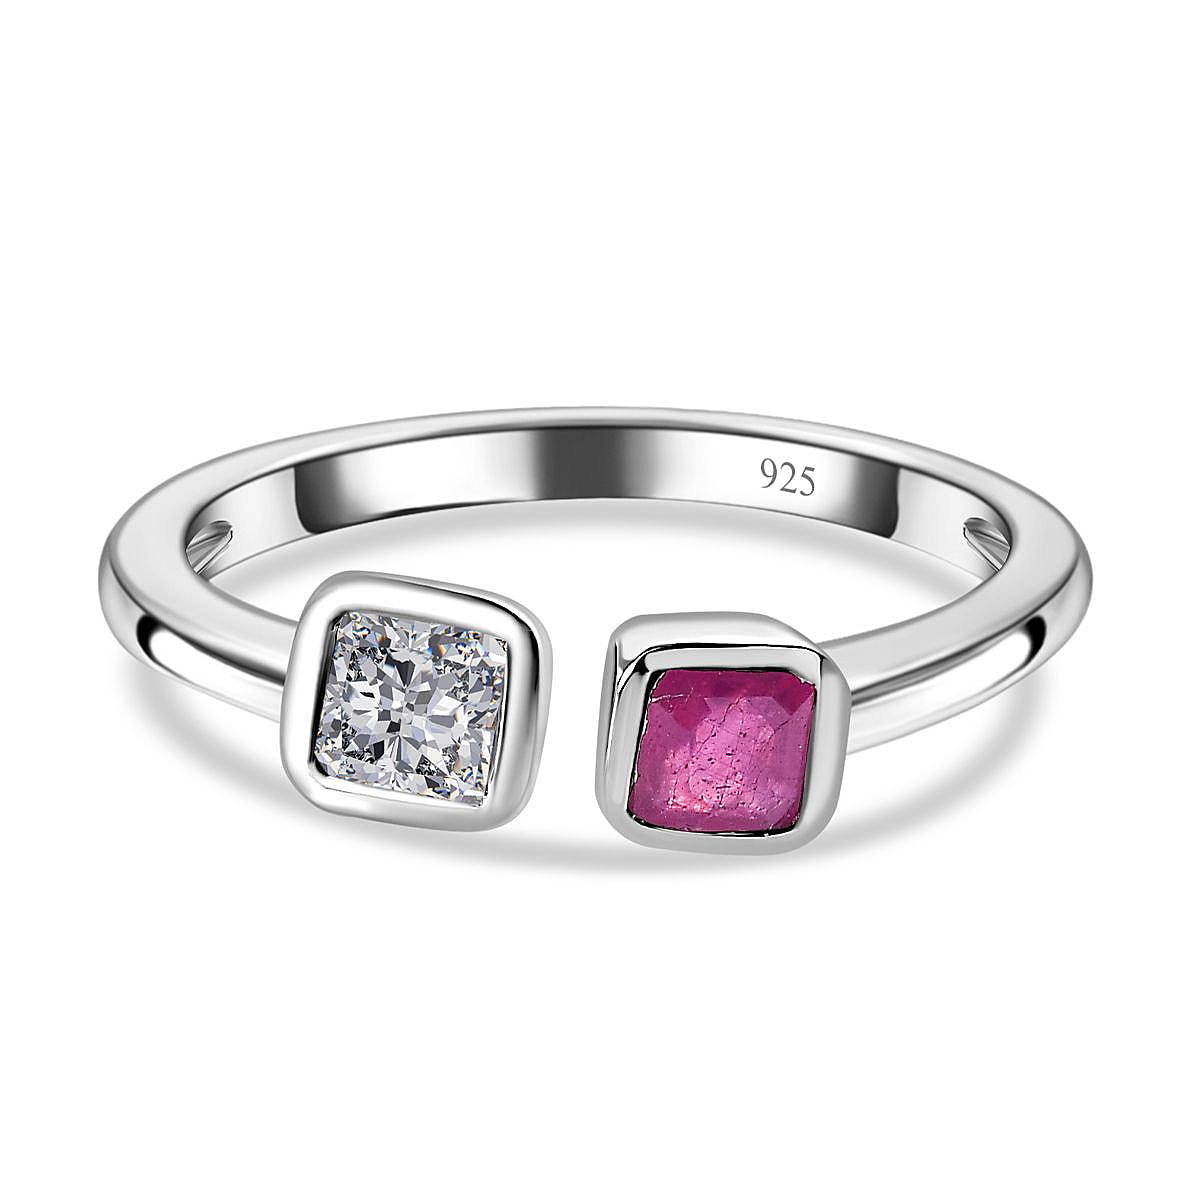 Ruby Asscher & Moissanite Cuff Ring in Platinum Overlay Sterling Silver